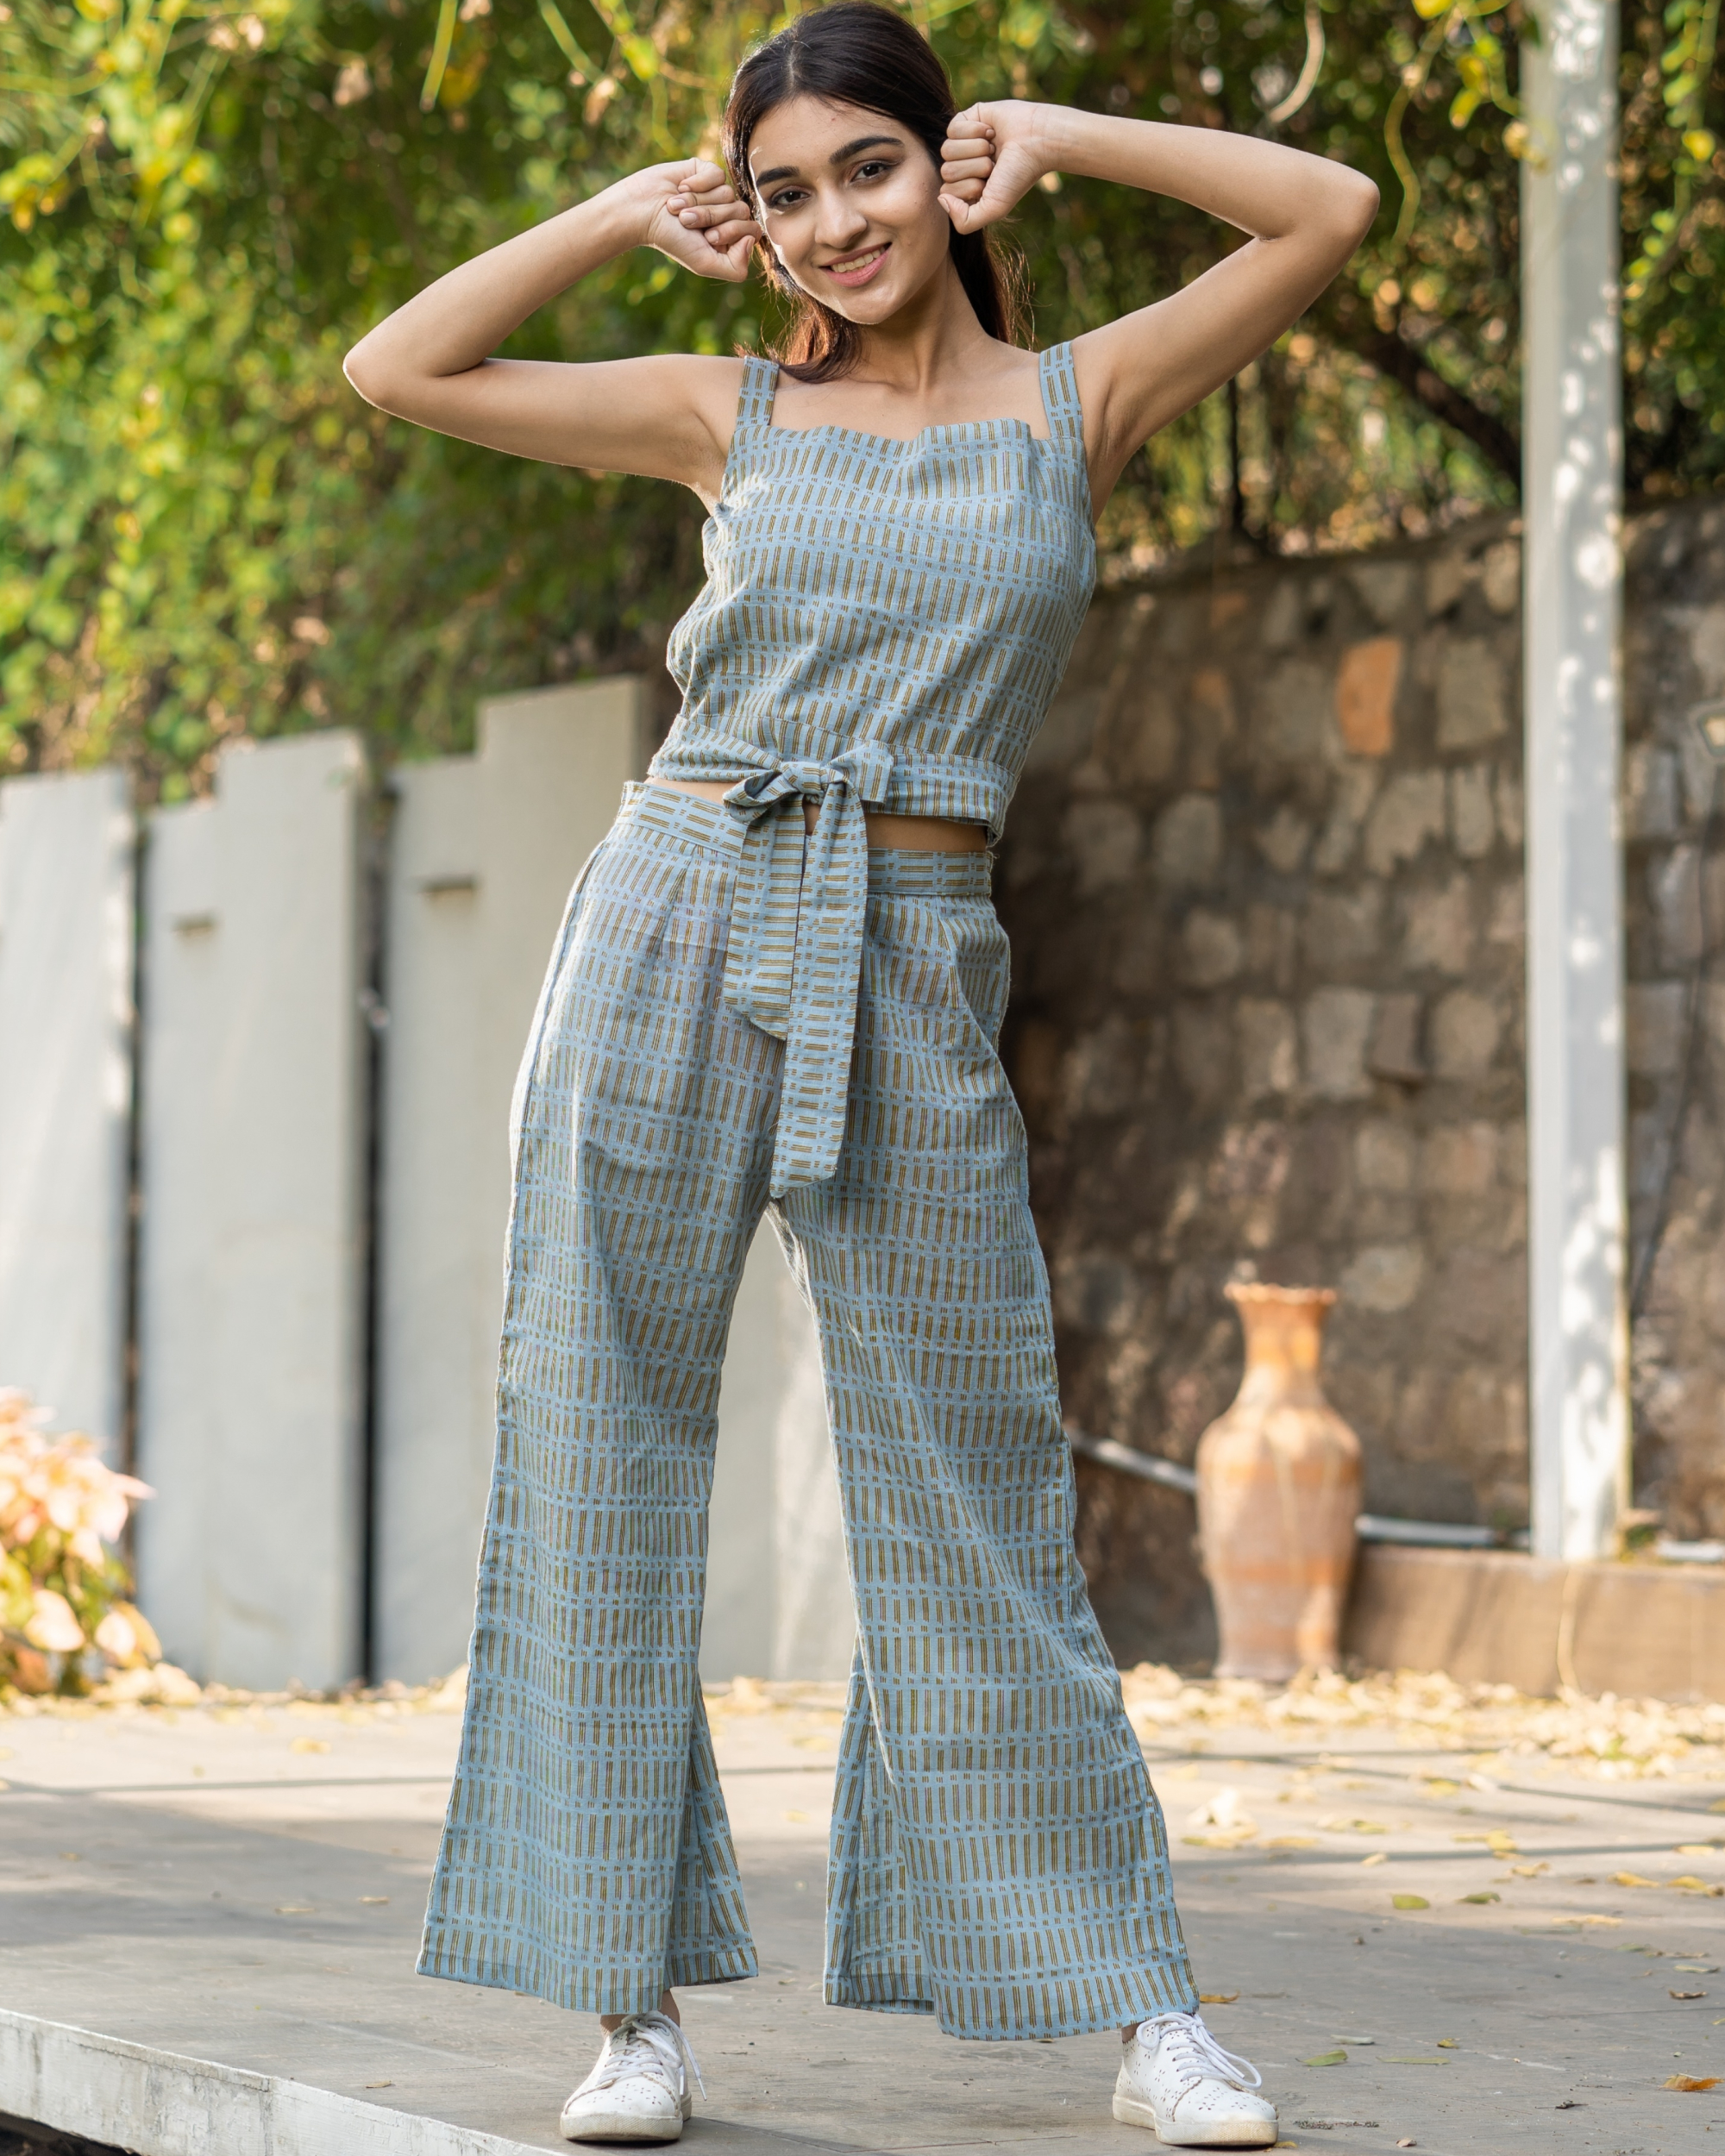 Update 133+ pants and top set